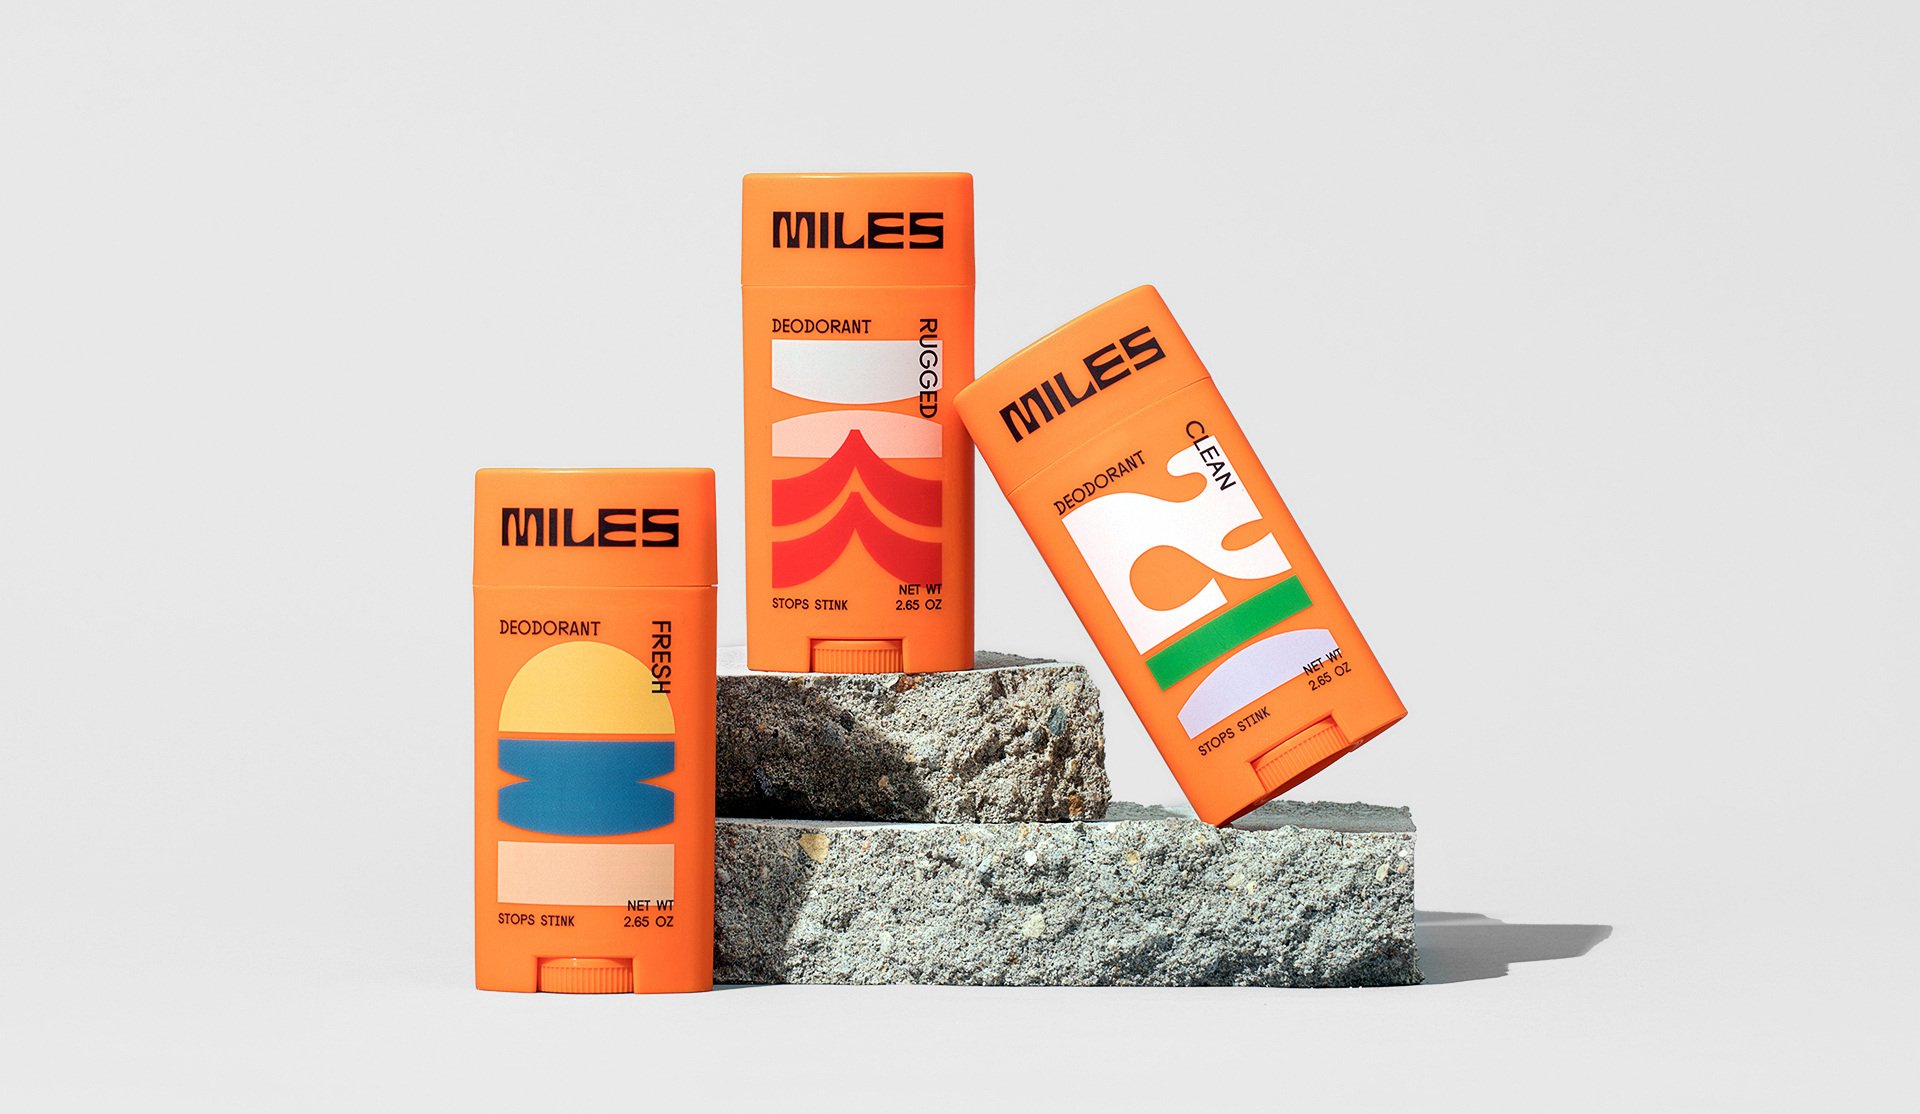 Logotype, illustration and packaging design for deodorant Miles designed by Minneapolis-based studio Buddy Buddy.